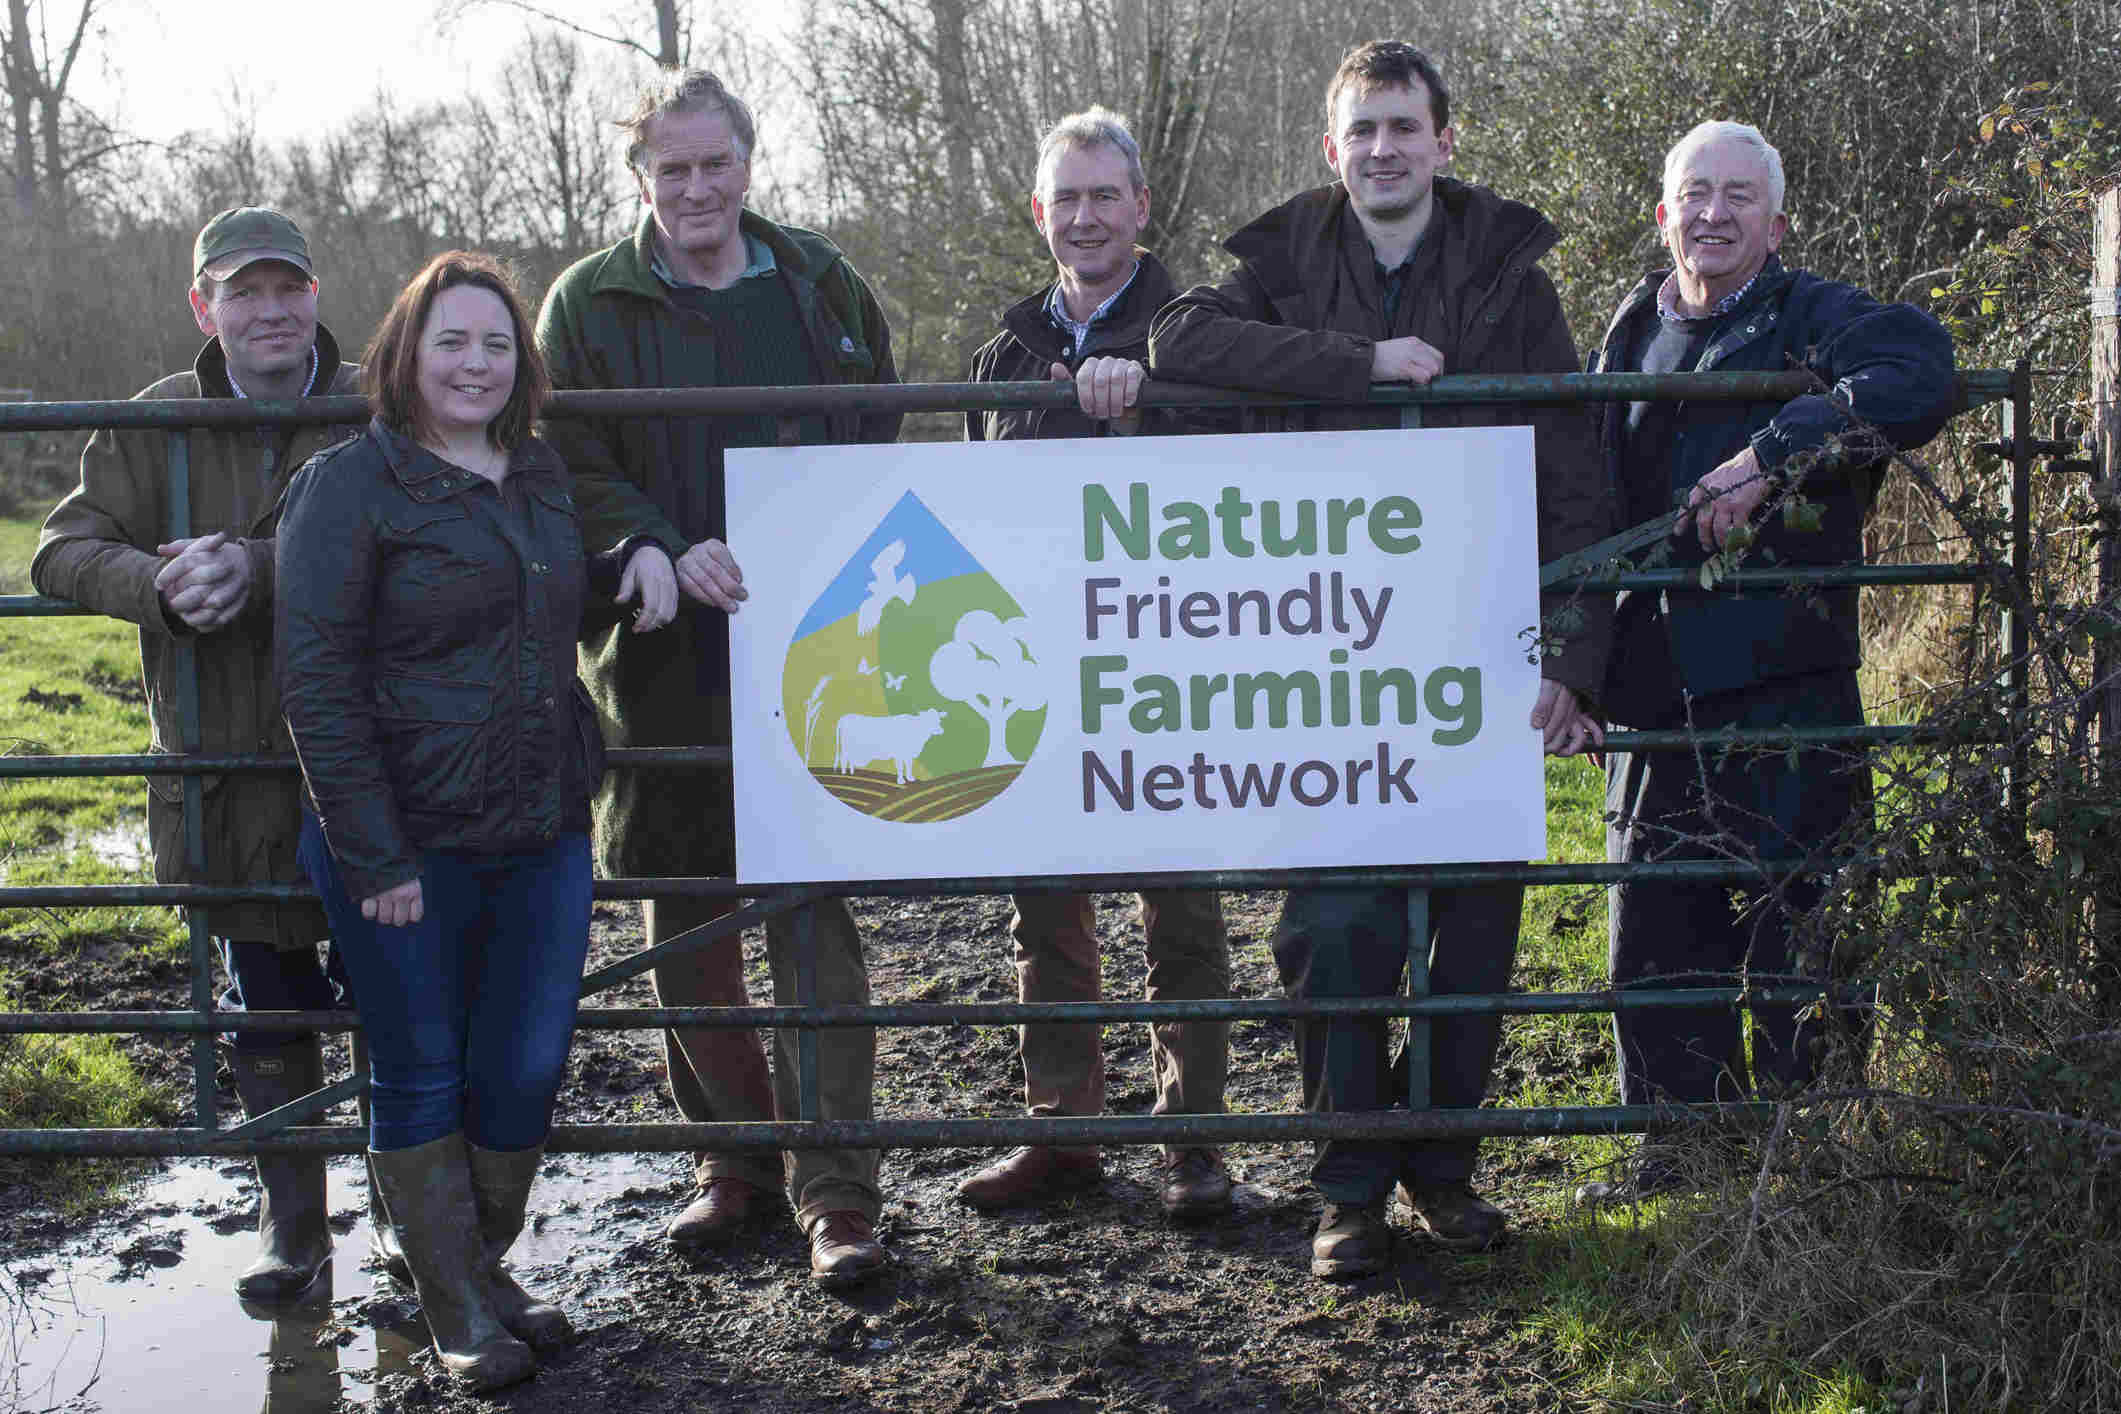 Five people leaning on a fence in a muddy field next to a sign: 'Nature Friendly Farming Network'.